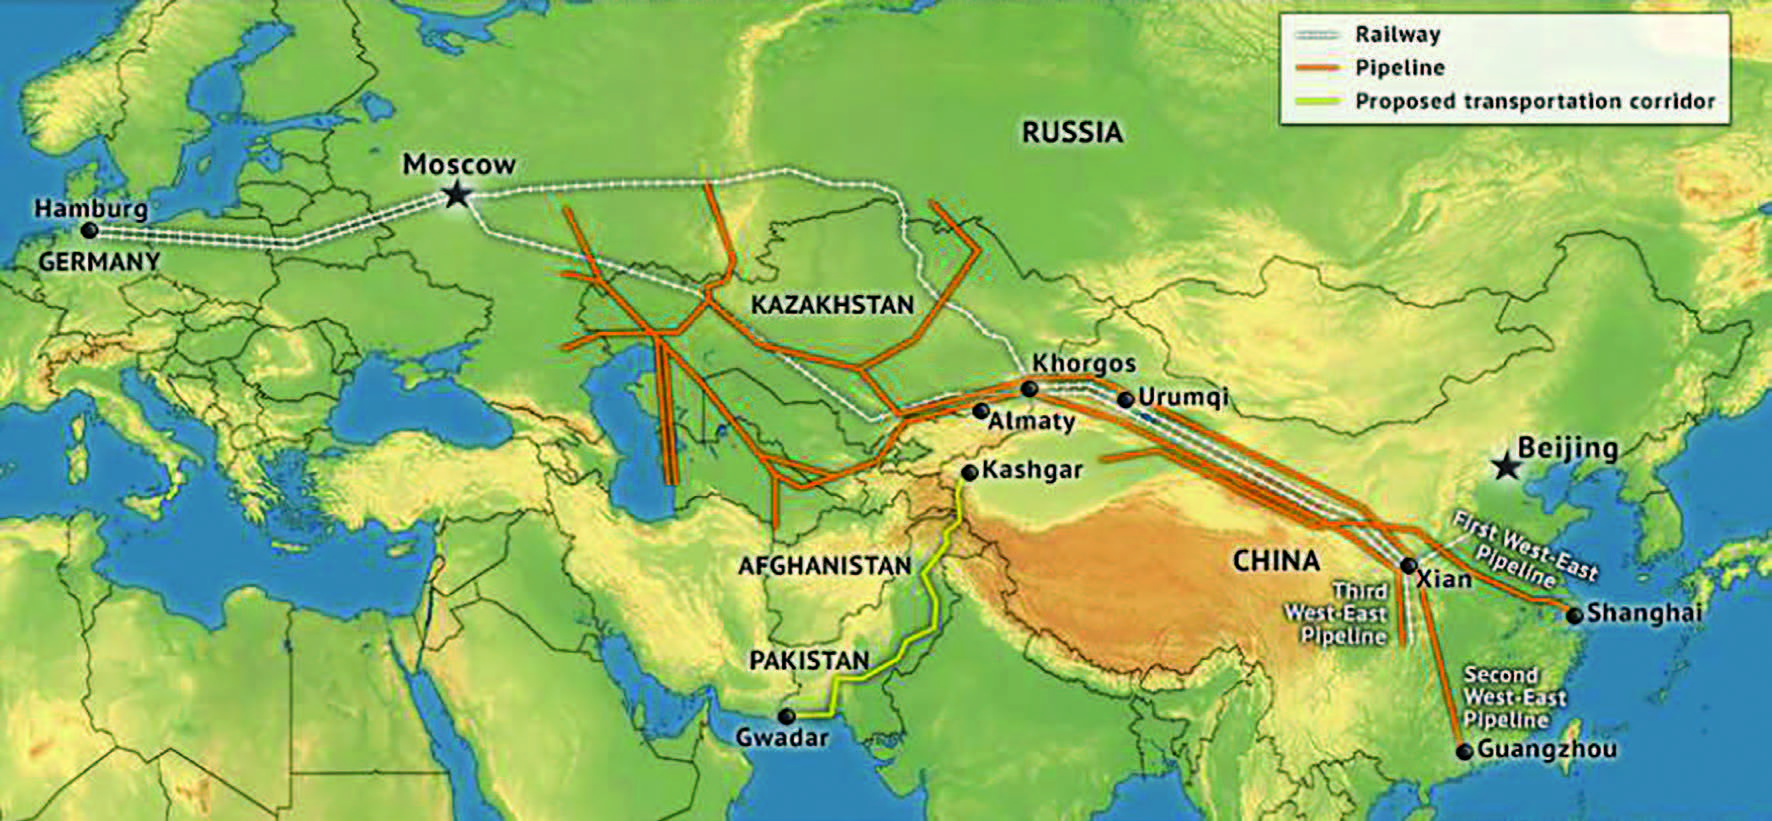 Map showing the infrastructure pipeline, railway and transportation corridor of China and Central Asian regions.